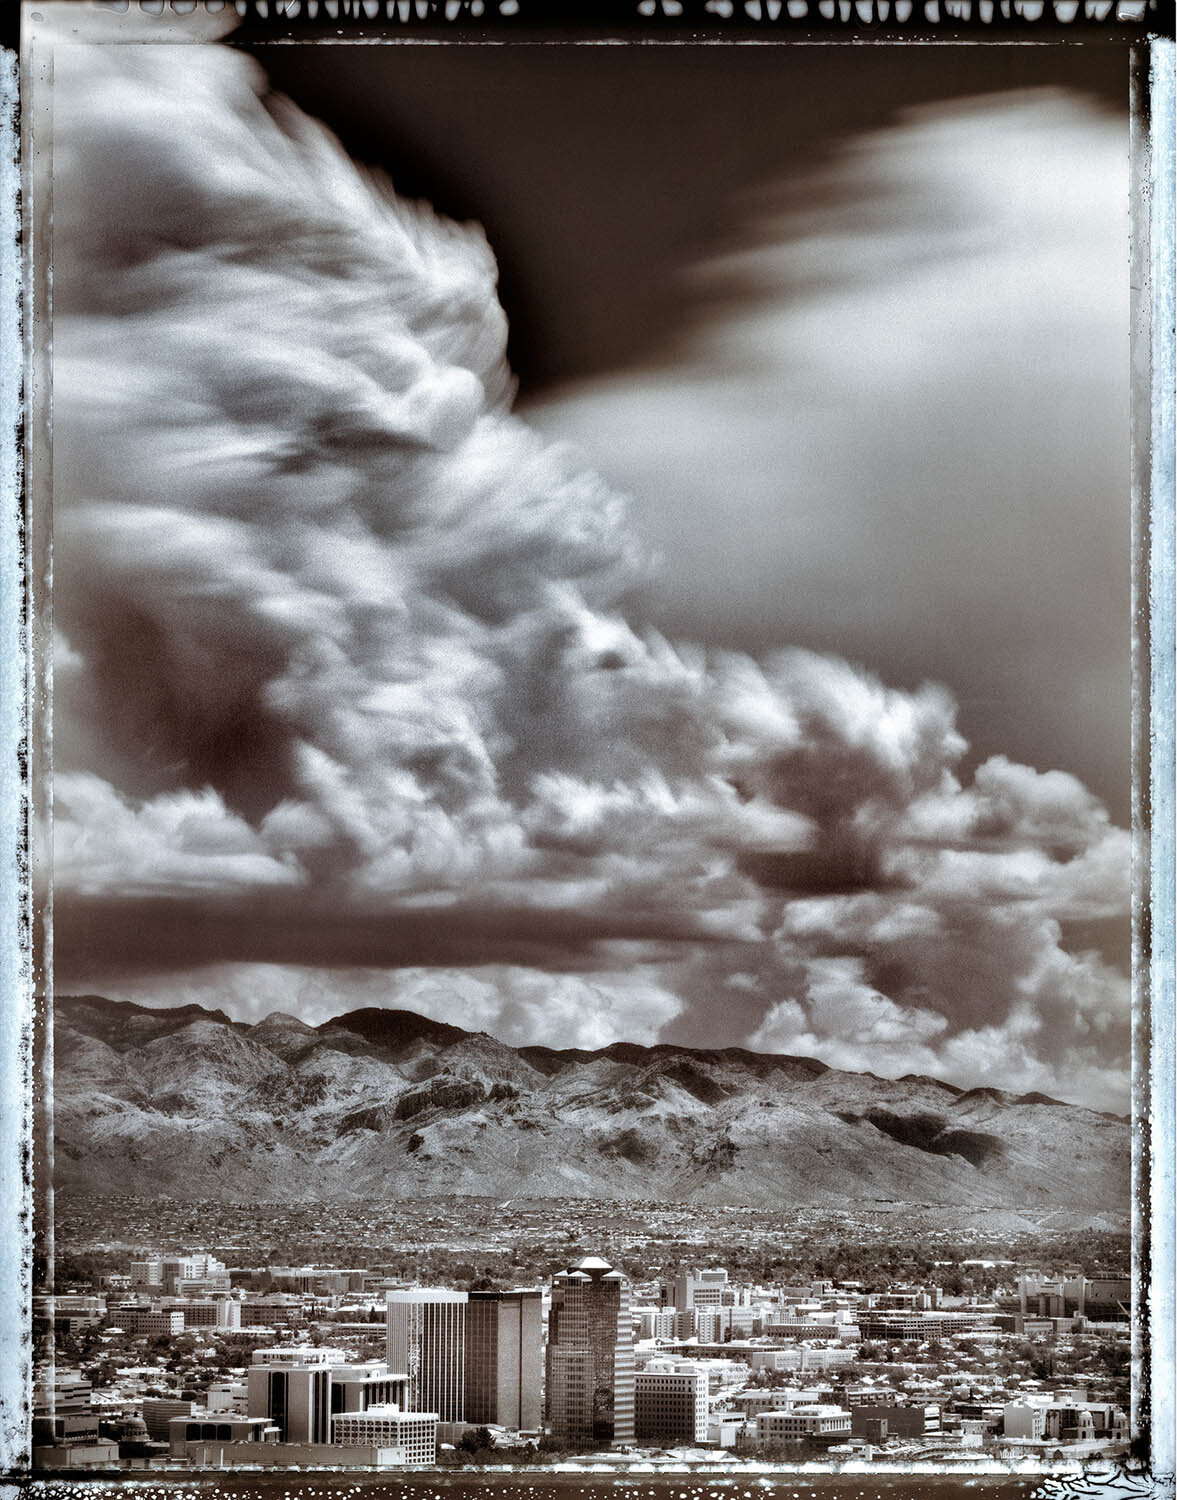 Stormclouds over Tucson #12, view from A-Mountain